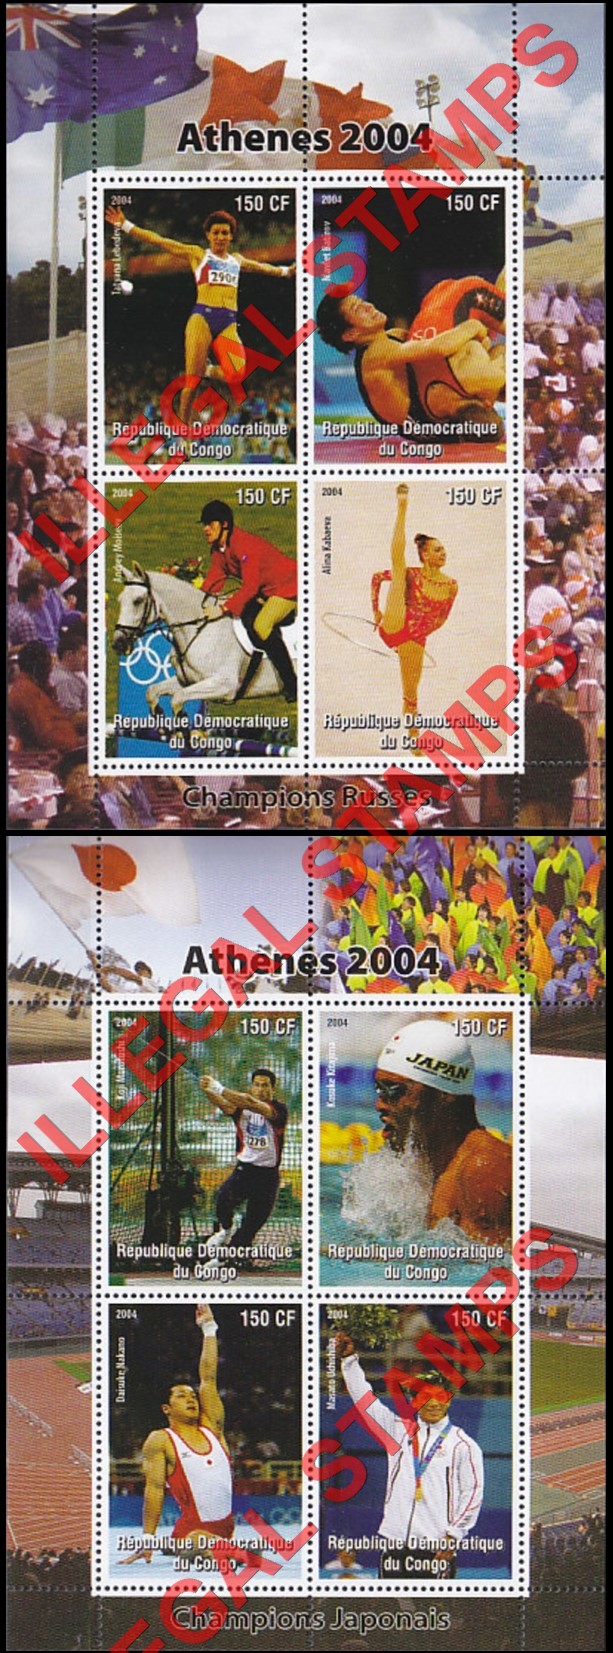 Congo Democratic Republic 2004 Olympic Games in Athens Illegal Stamp Souvenir Sheets of 4 (Part 1)